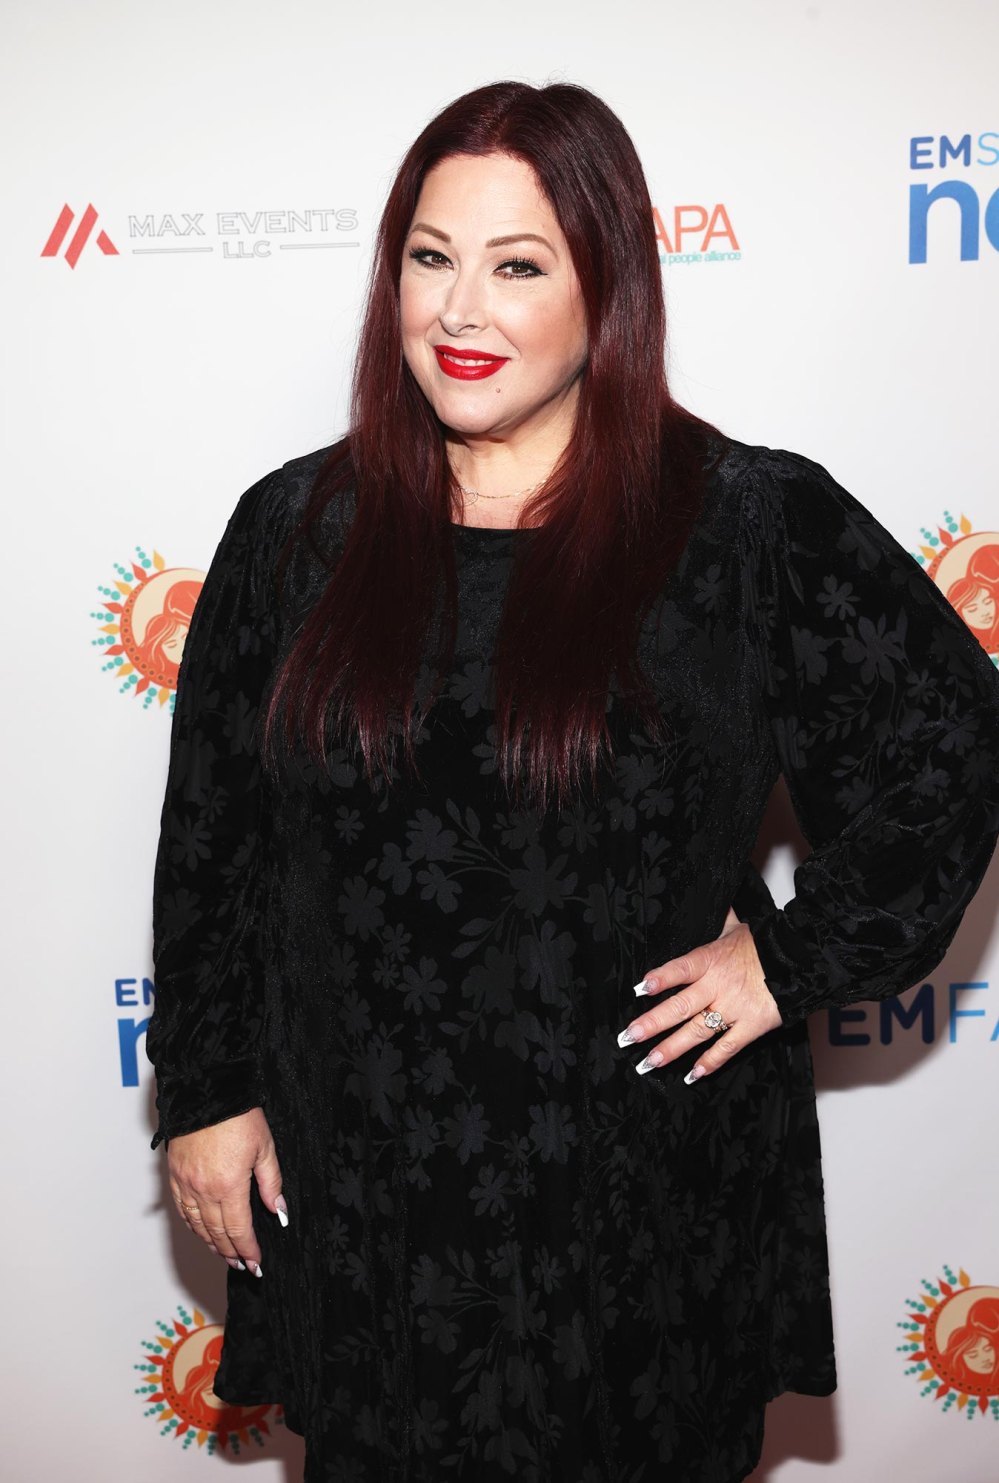 Carnie Wilson refused Ozempic despite doctor's recommendation due to 40 pound weight loss